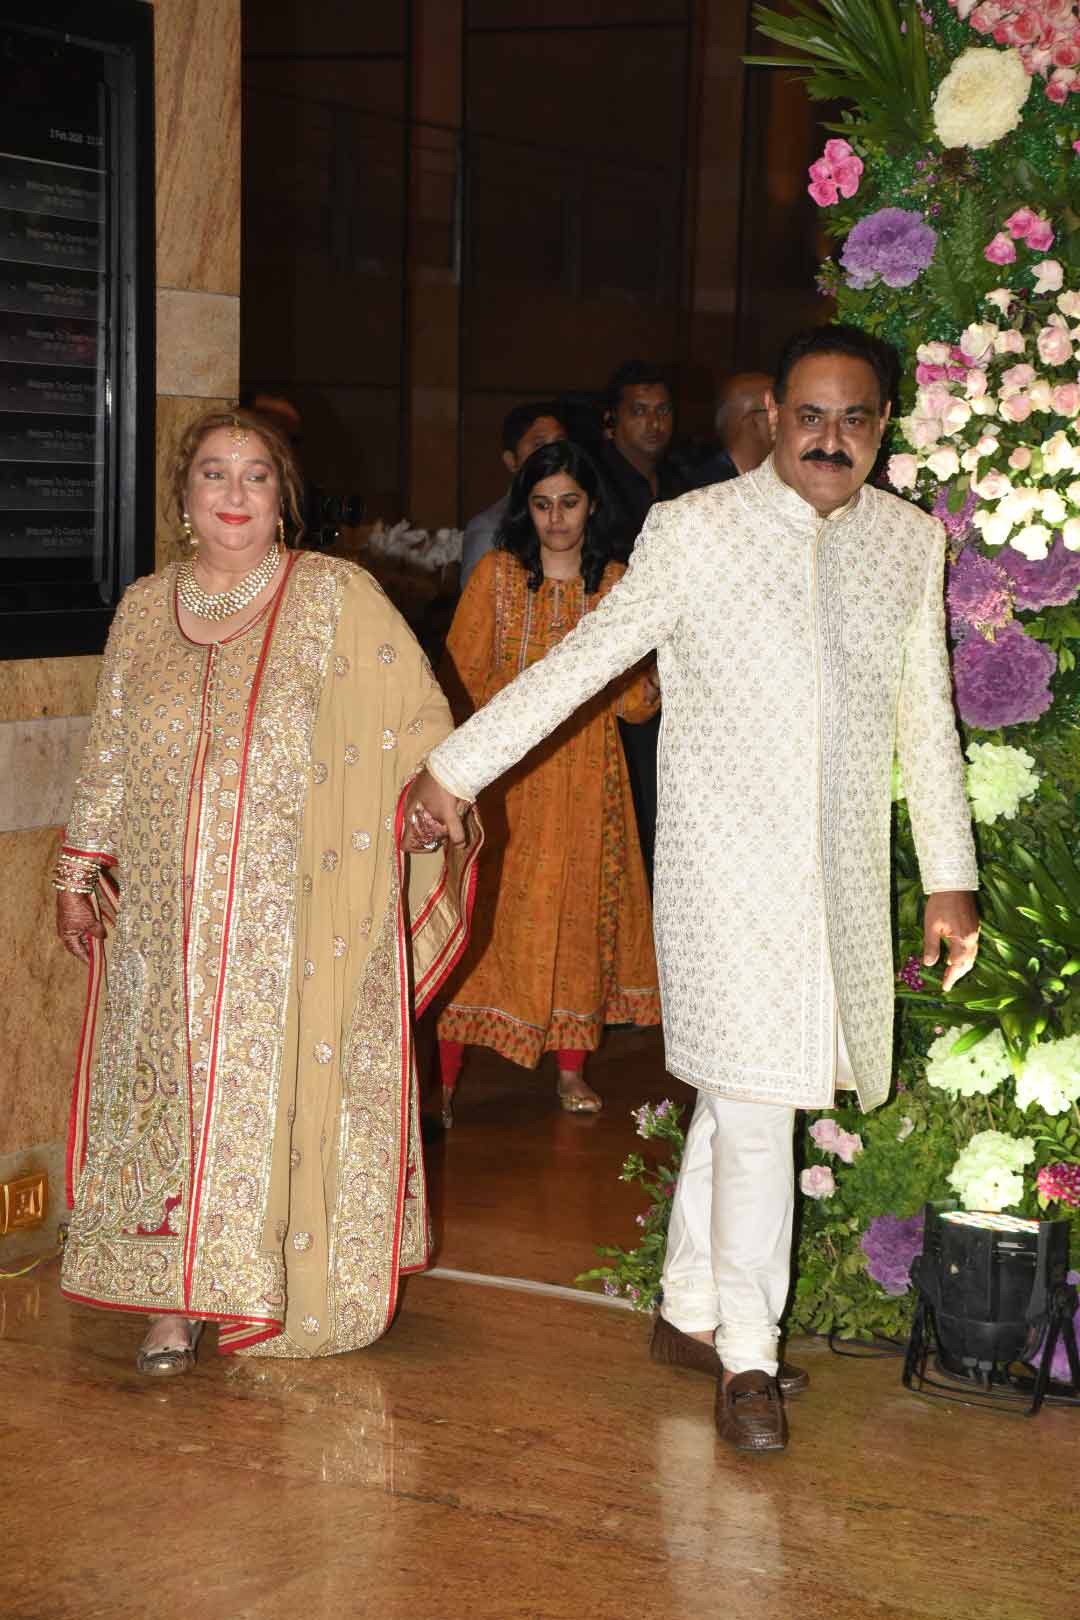 The evening of February 03 was no less than a star-studded affair. From Ambanis to Khans, many bigwigs from the industry attended the ceremony.
In picture: Rima Jain with husband Manoj Jain at the wedding reception of Armaan and Anissa.